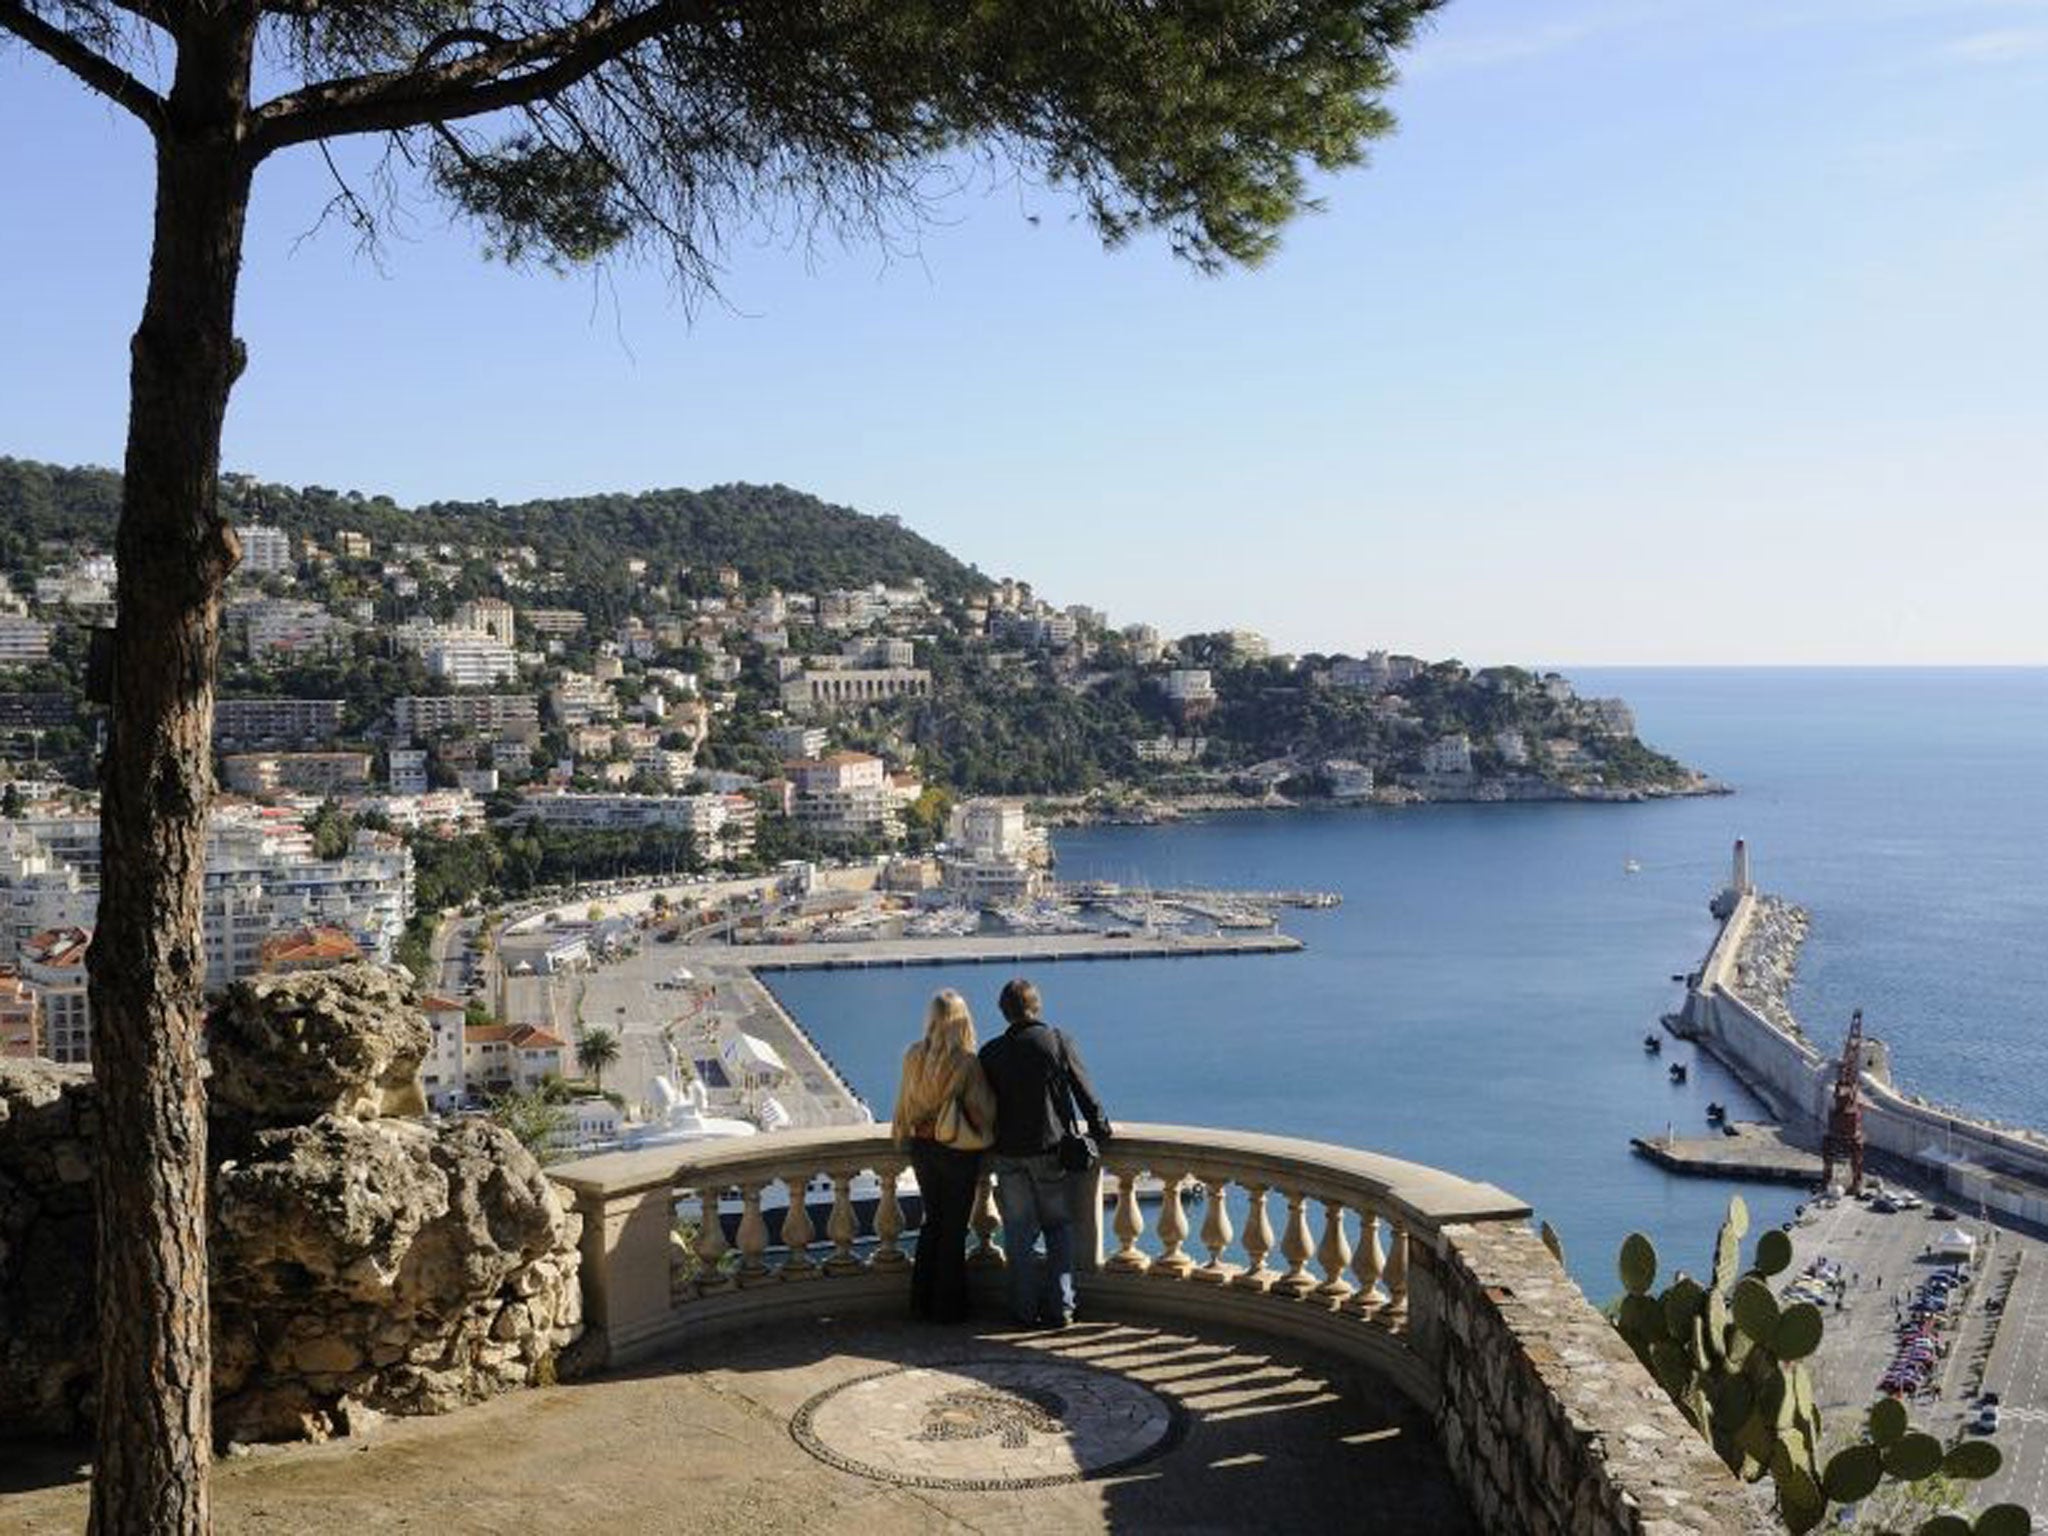 A place in the sun at a lower cost: if you’re planning to visit Nice, you can make big savings on a car rental by planning ahead